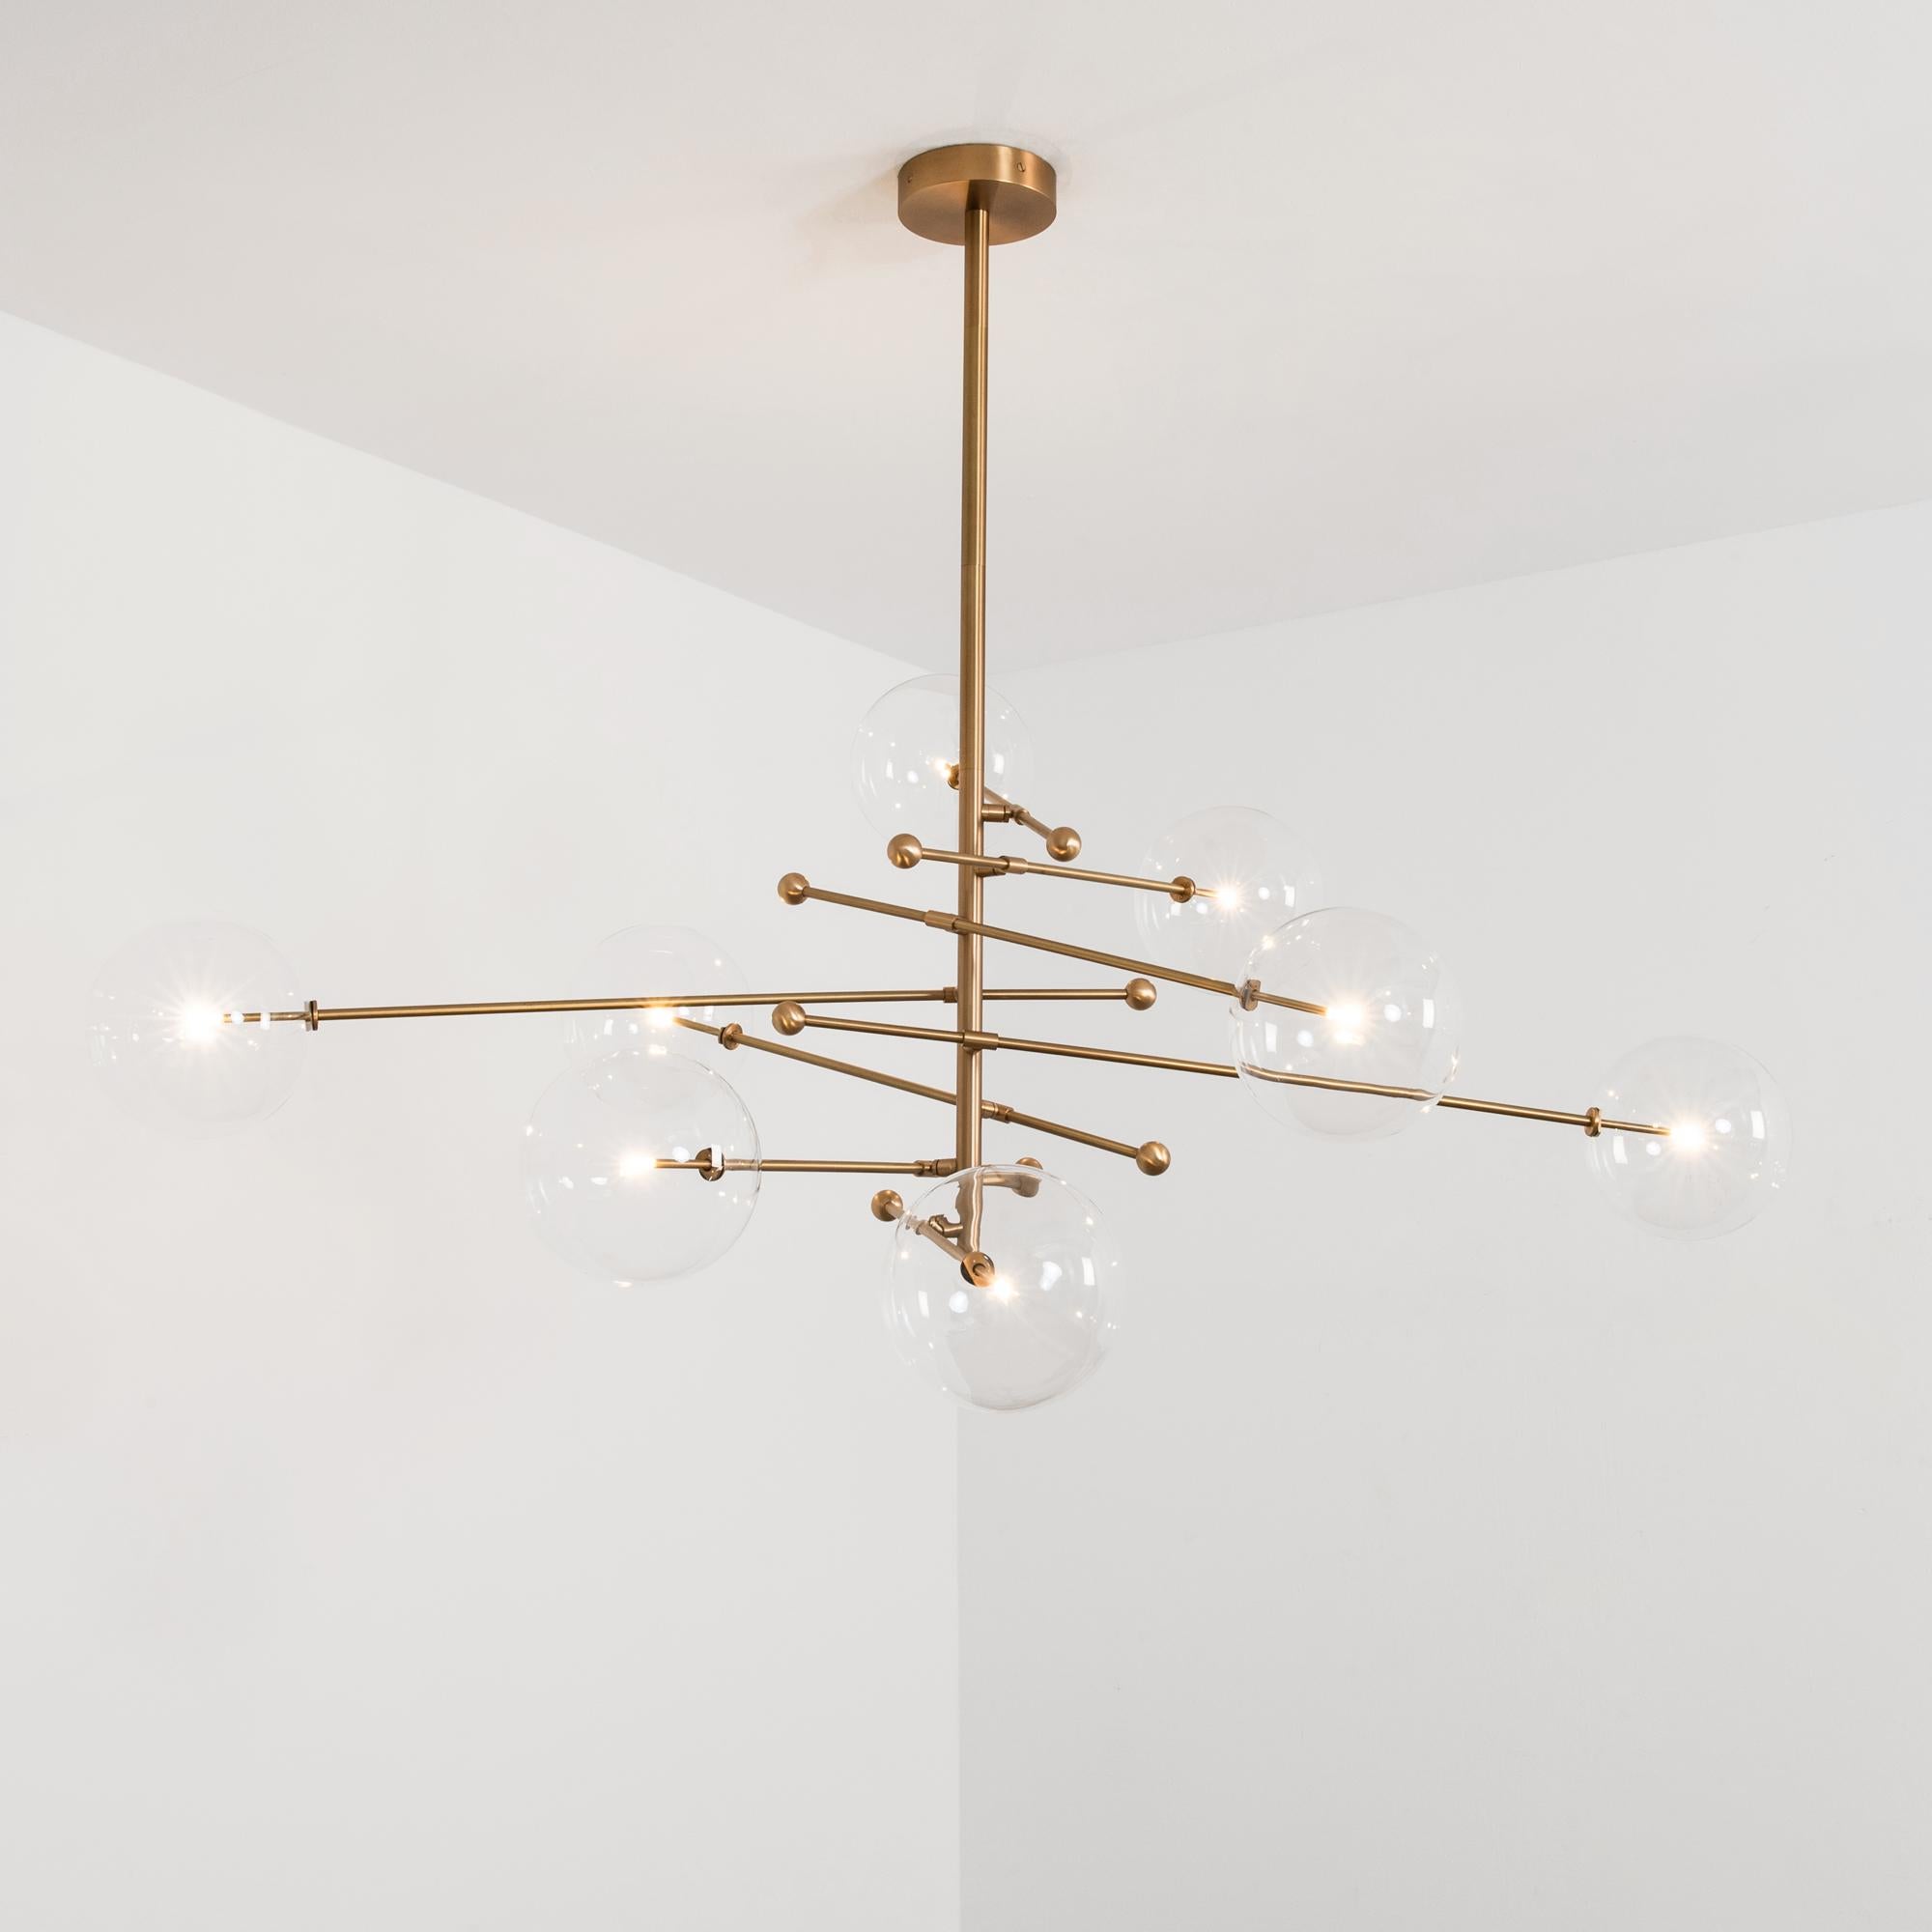 RD15 12 Arms Polished Nickel Chandelier by Schwung For Sale 3